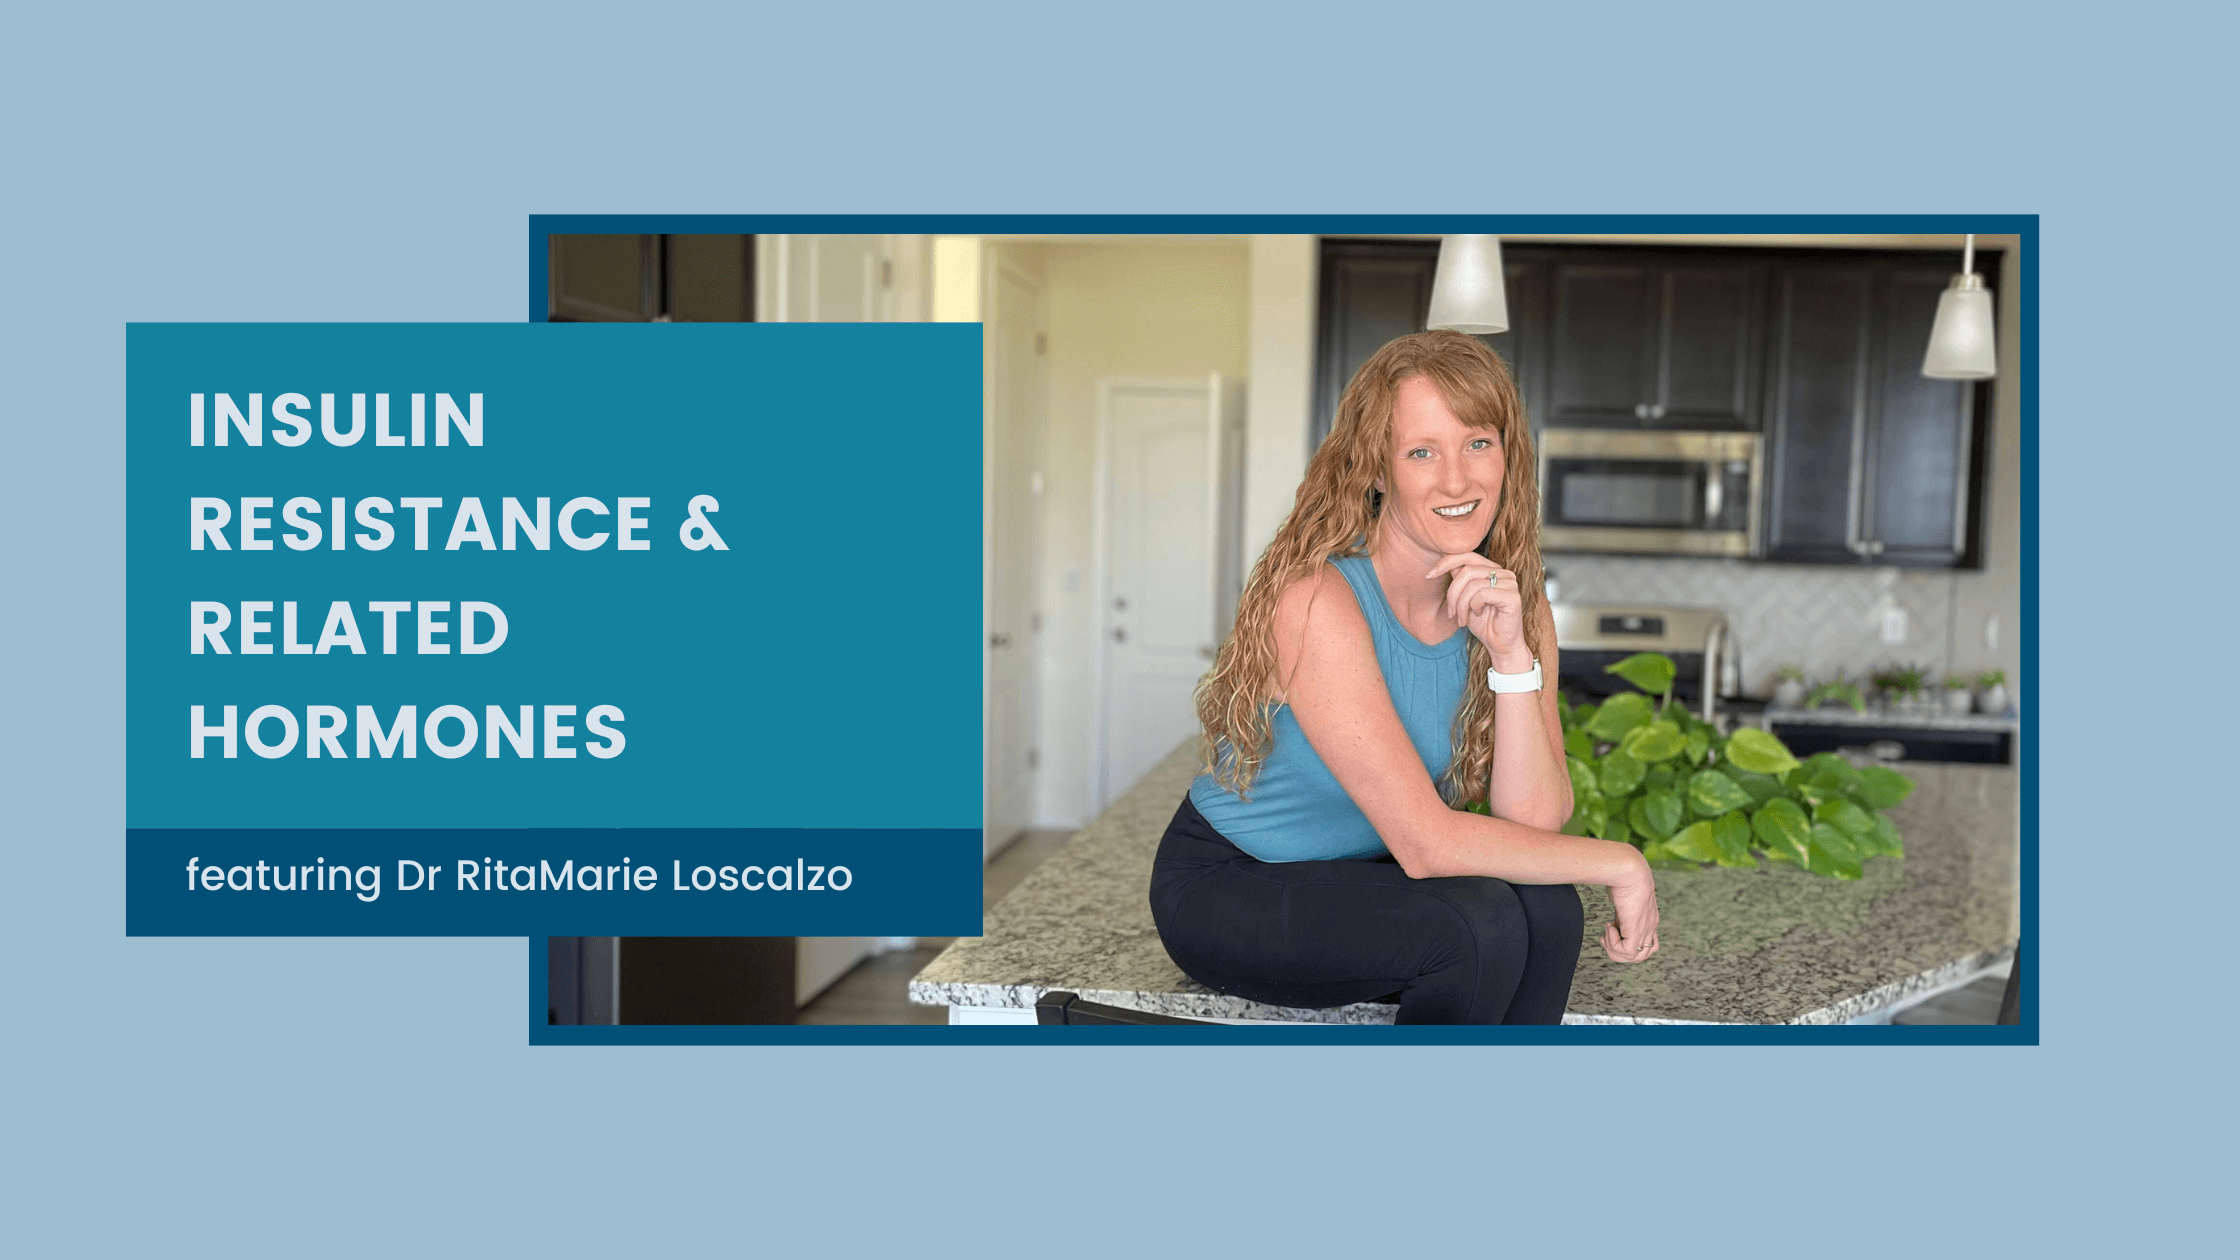 Functional Nutritionist Andrea Nicholson interviews Dr RitaMarie Loscalzo on the Holistic Health Bites podcast talking all about insulin resistance and related hormones